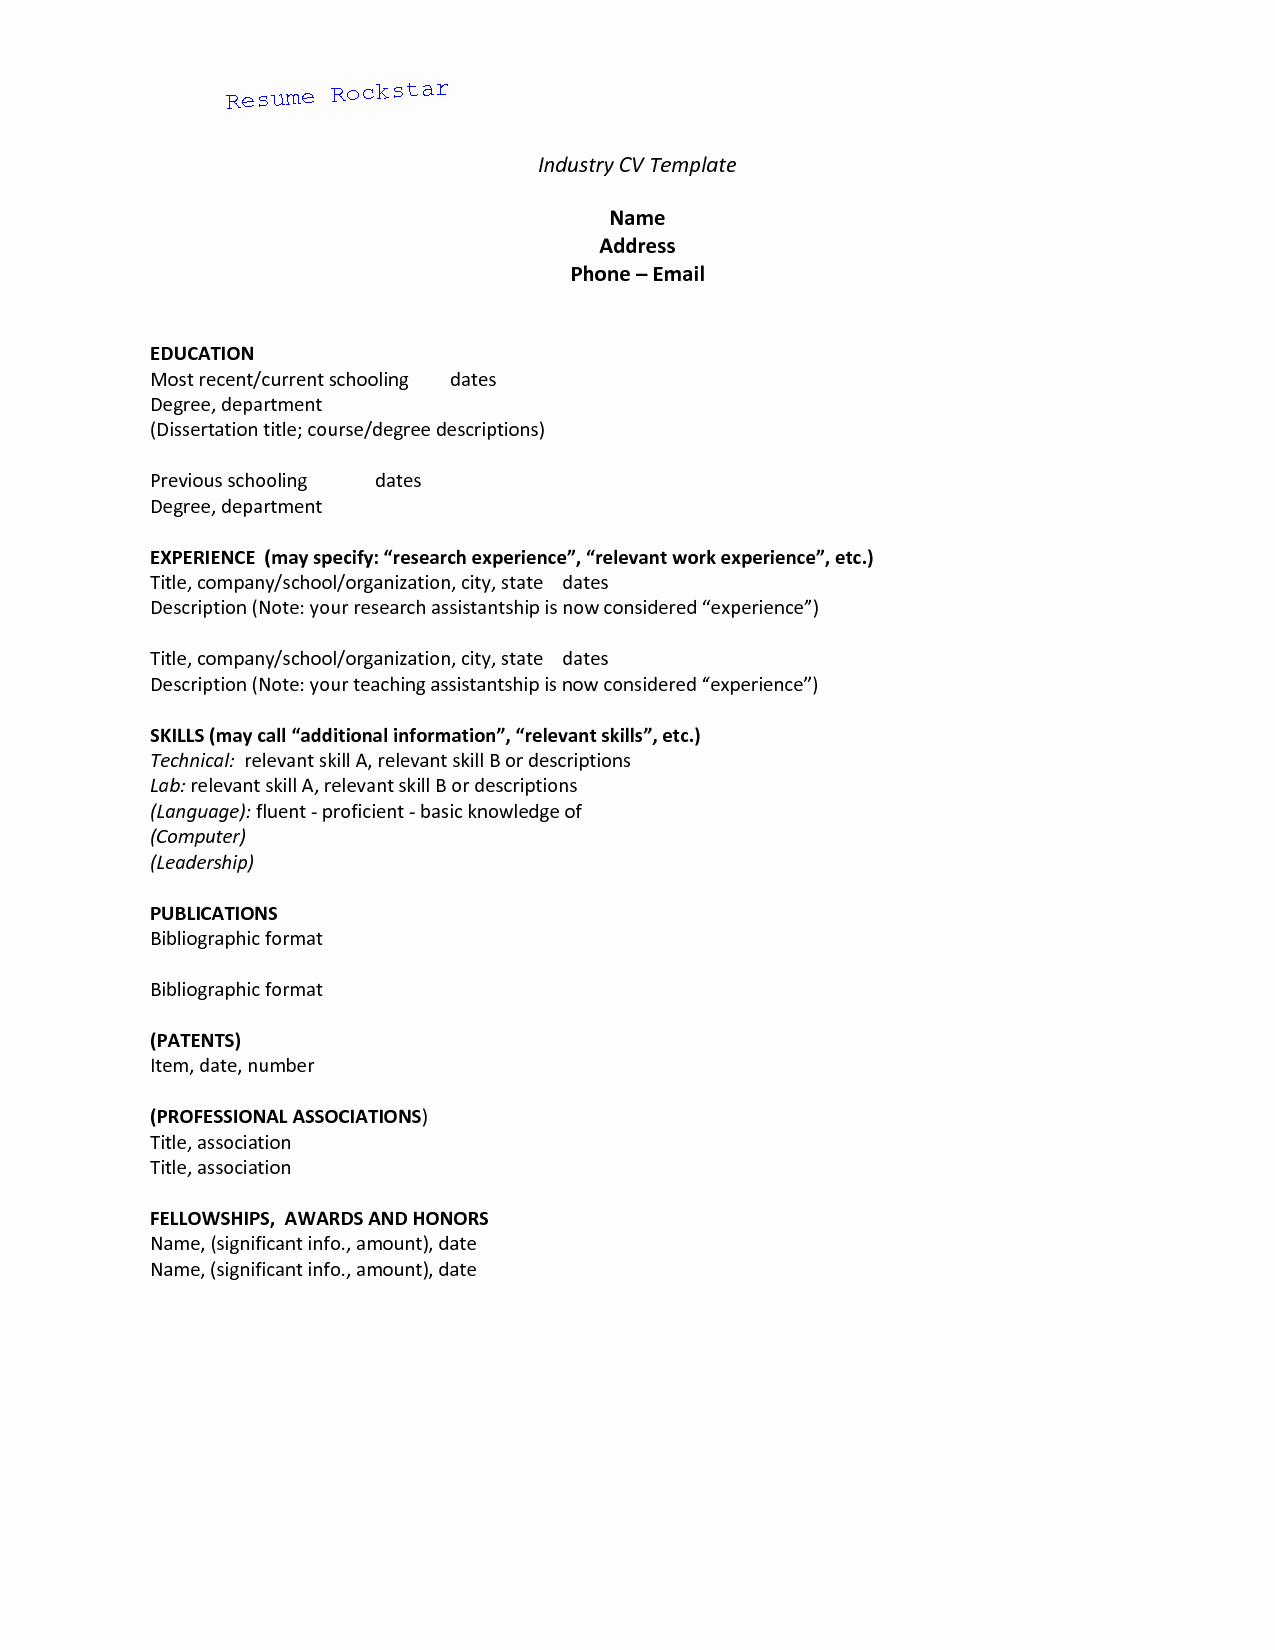 Example Of Basic Cover Letter Awesome Basic Cover Letter for A Resume